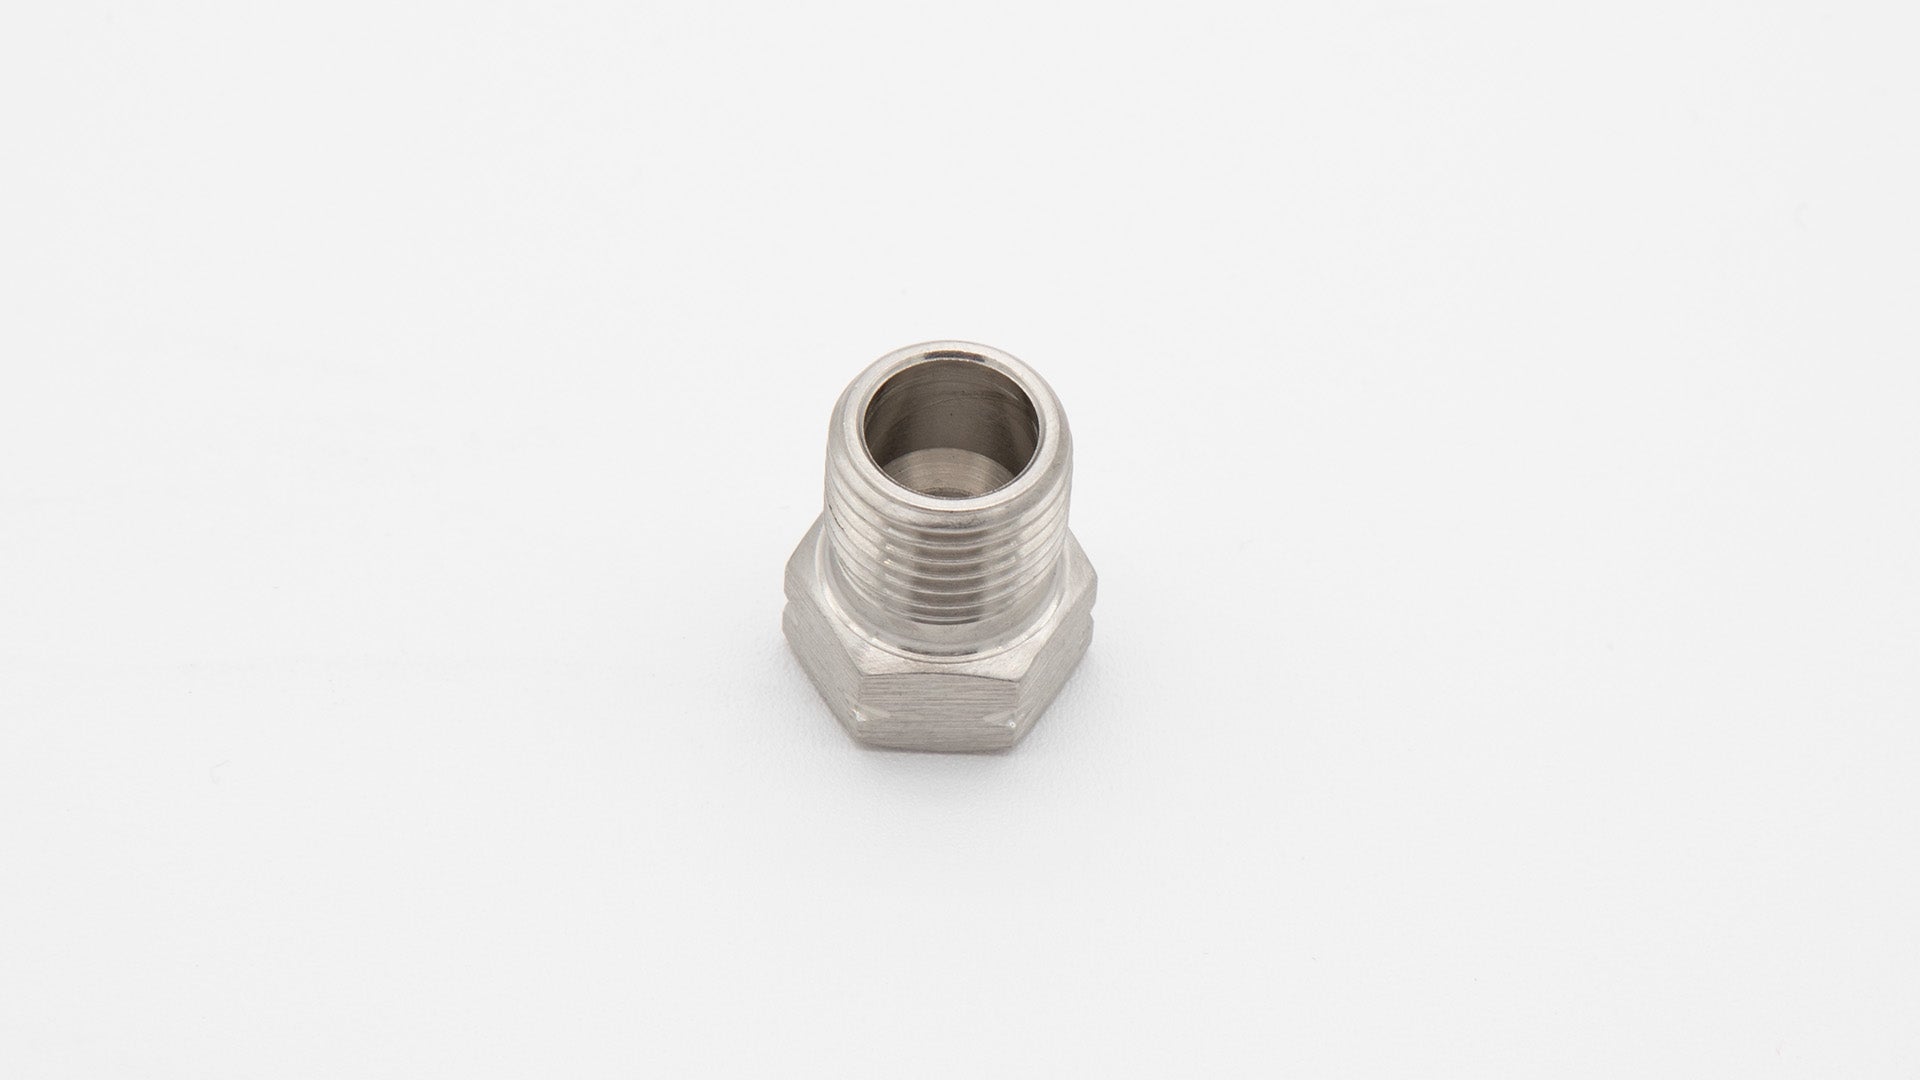 A close-up of a metal nut